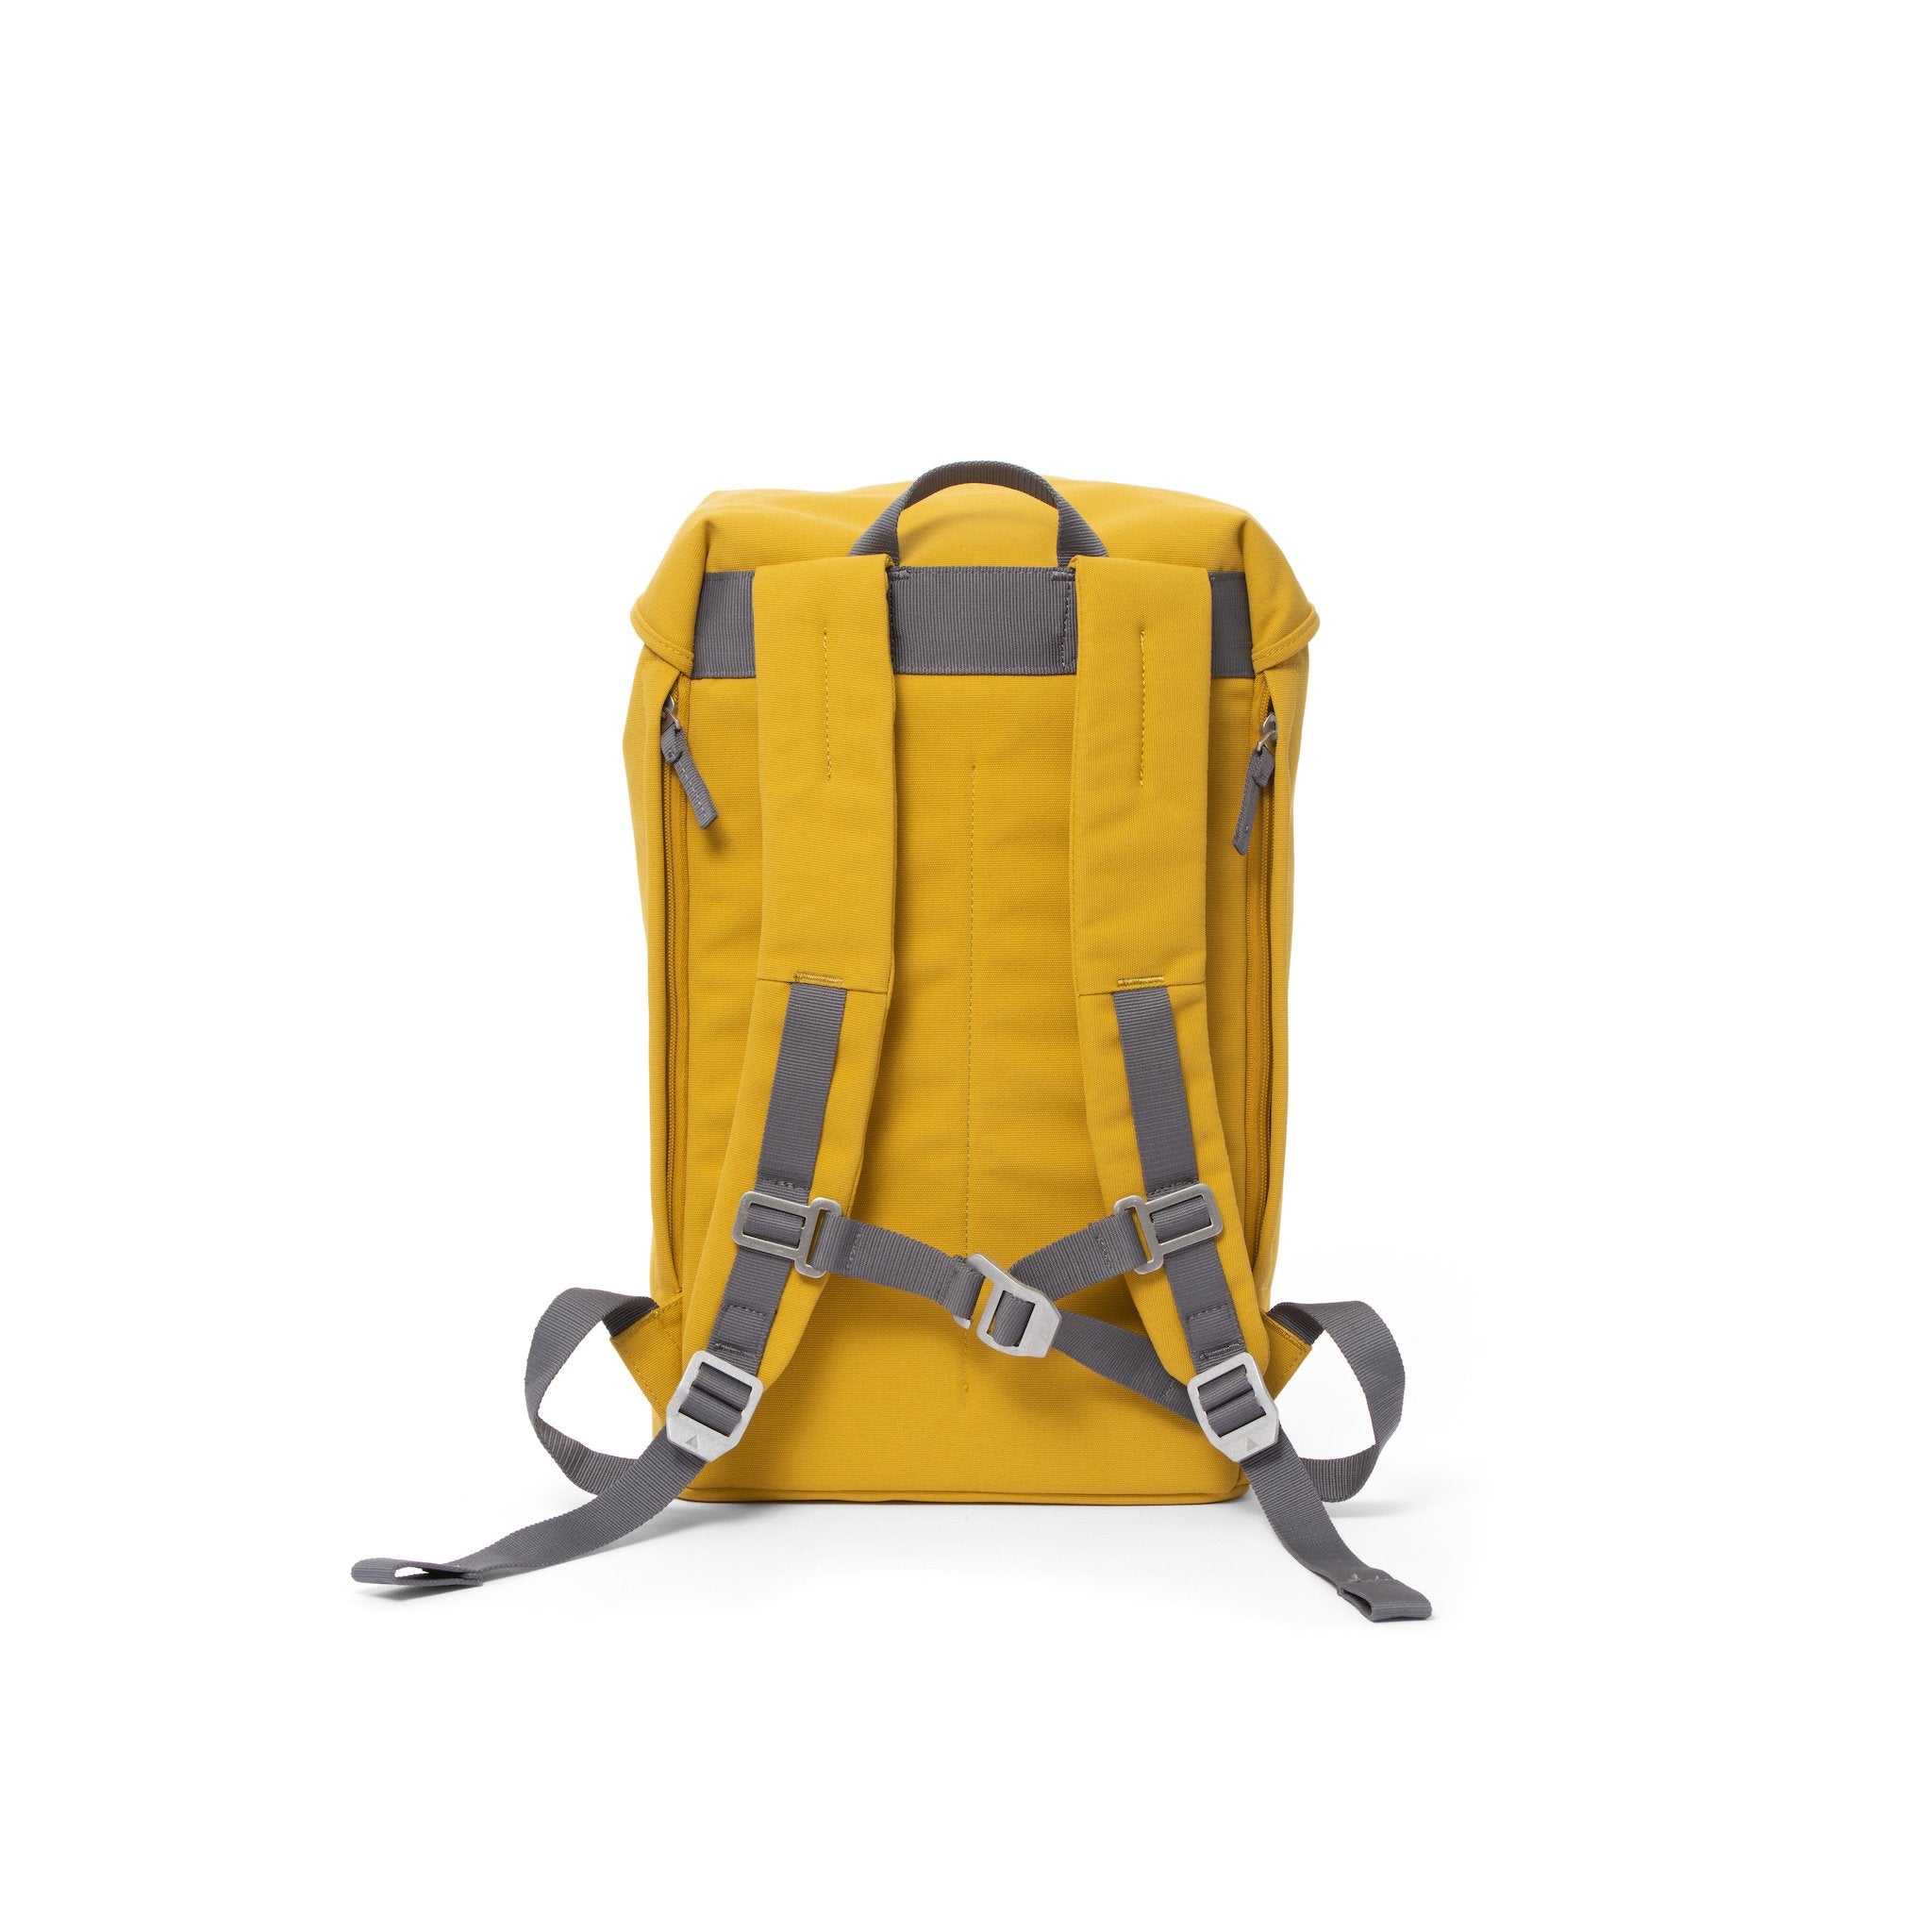 Yellow waterproof backpack with padded shoulder straps and chest strap.